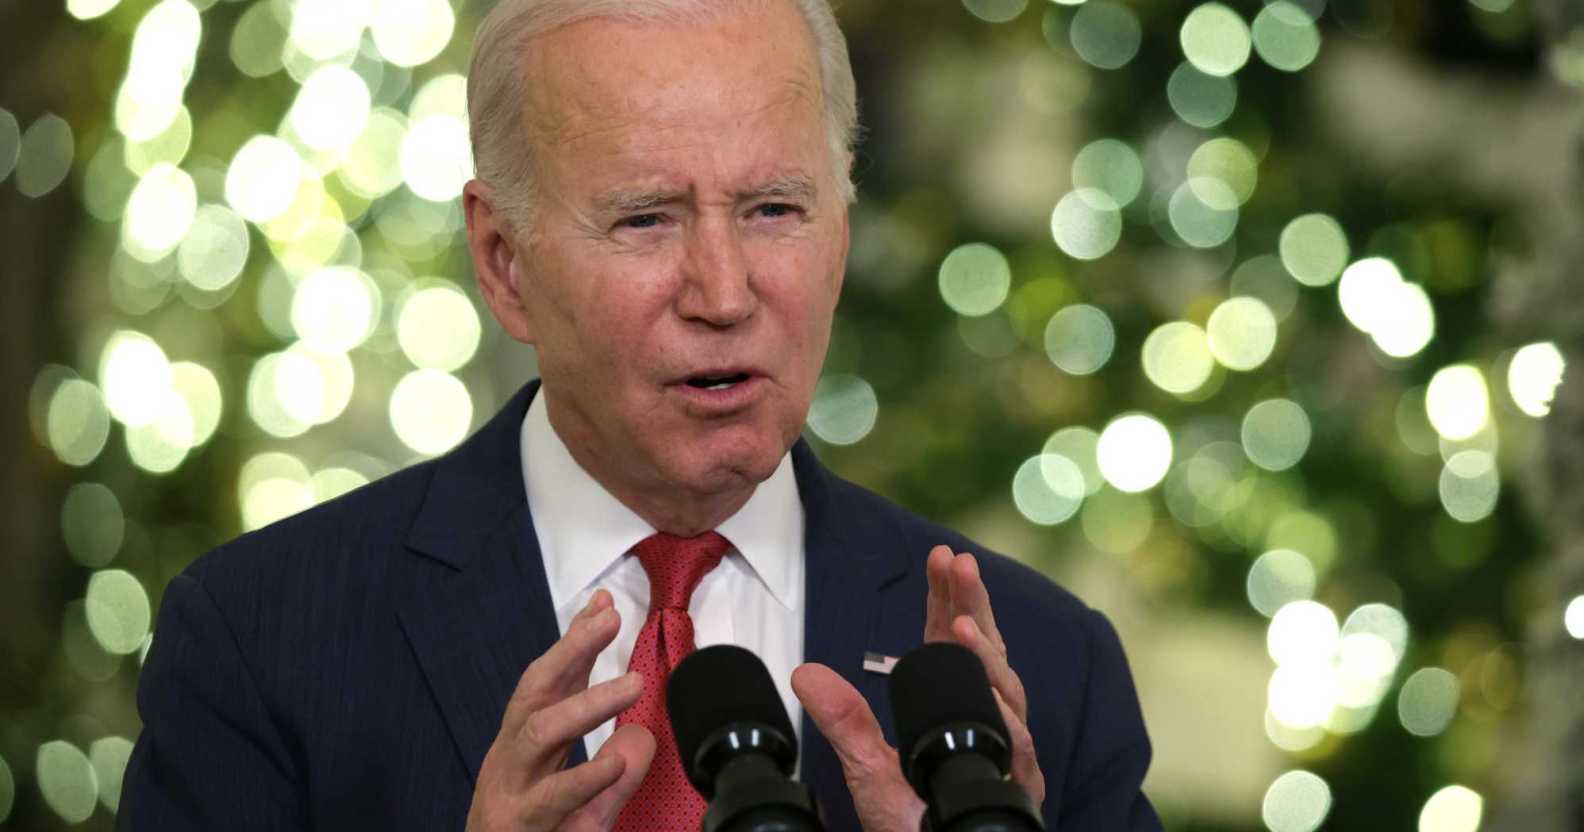 Joe Biden speaking into a microphone, there are Christmas trees in the background